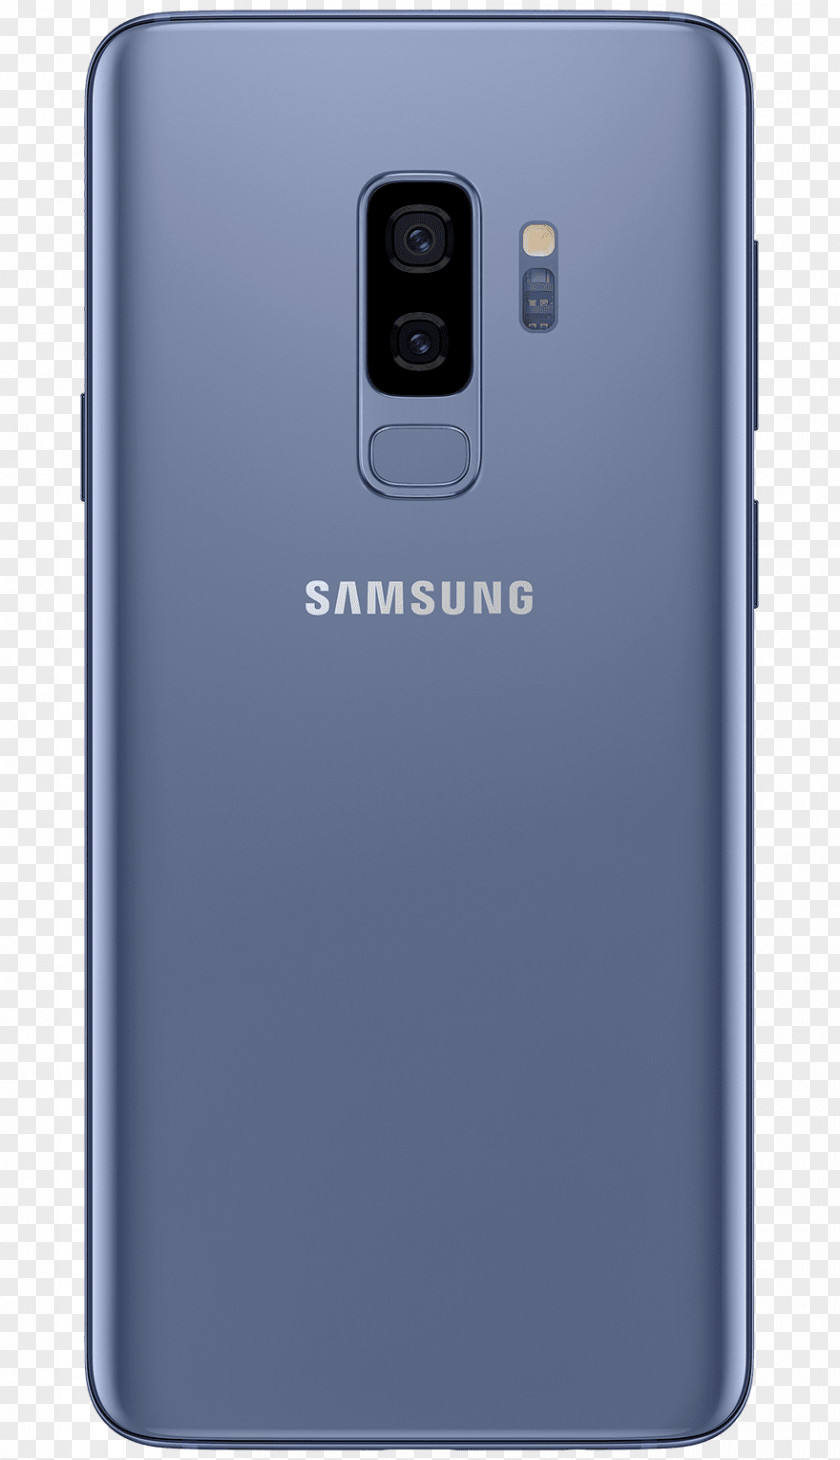 Samsung Galaxy S9+ Smartphone Telephone Android PNG